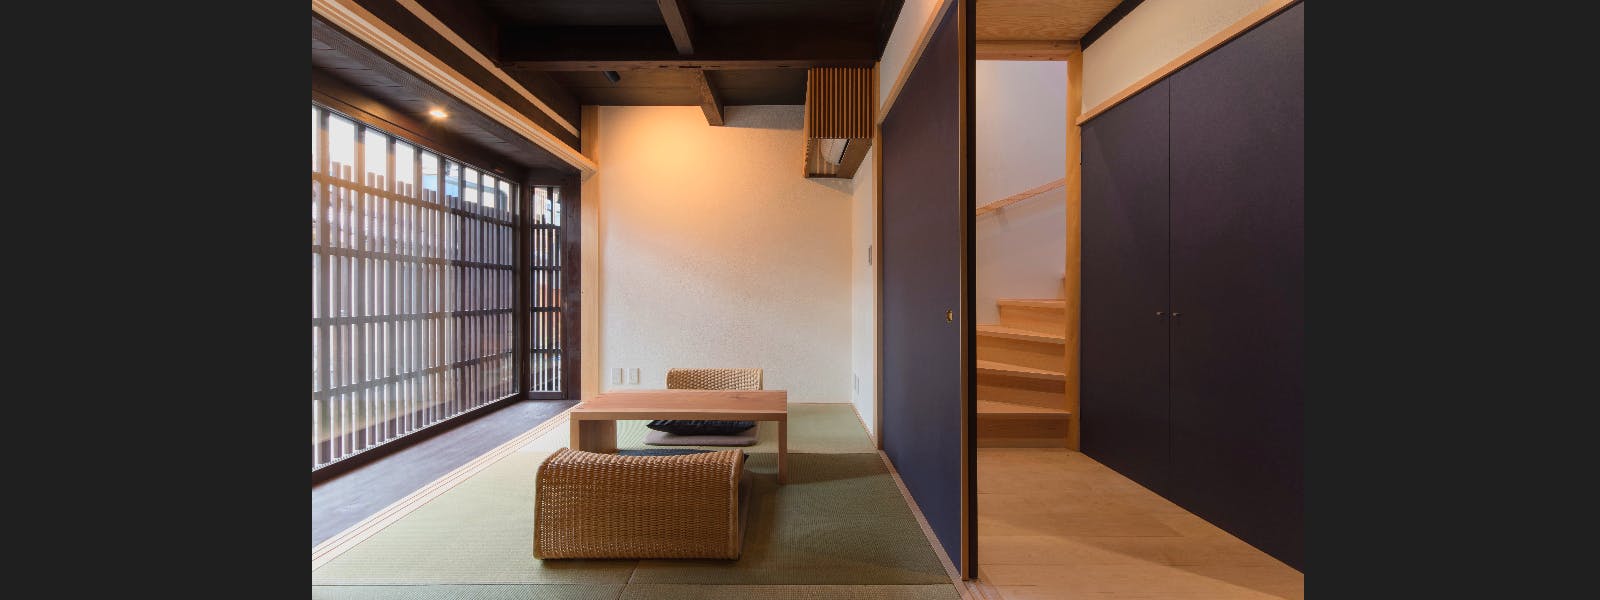 BenTen West Machiya in Kyoto 1F Japanese Room and Staircase